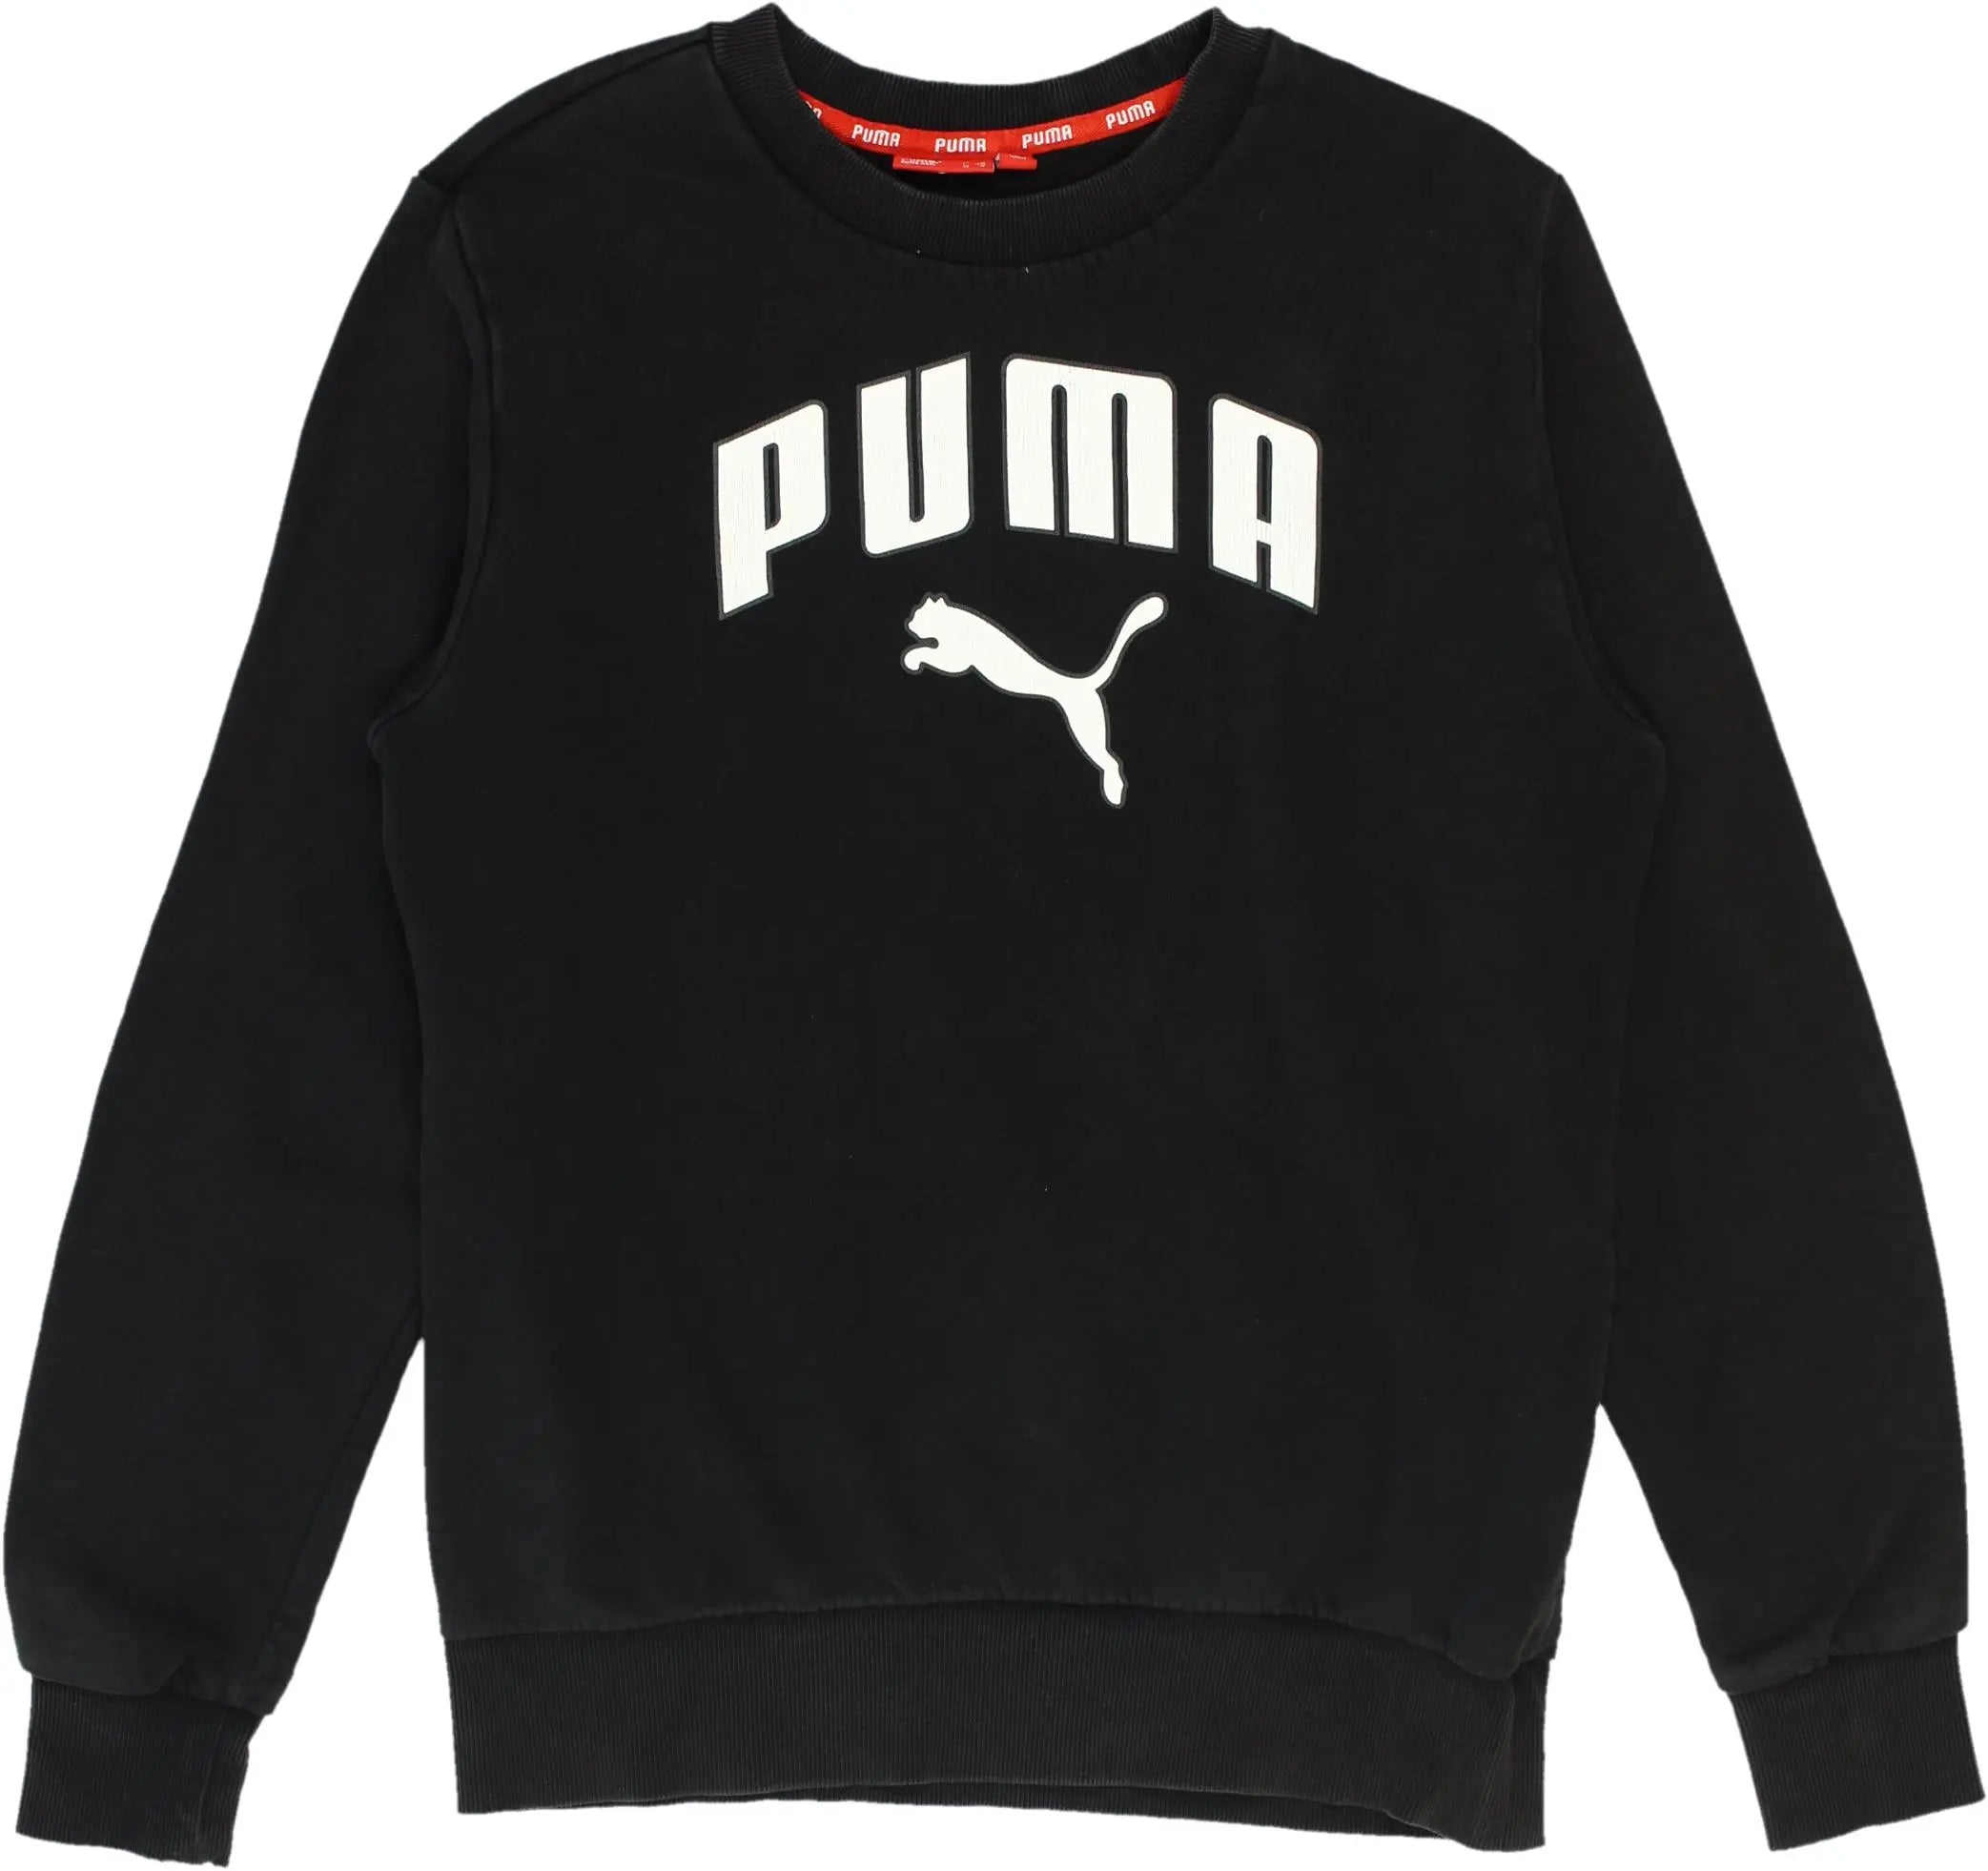 Puma - 00s Puma Sweater- ThriftTale.com - Vintage and second handclothing